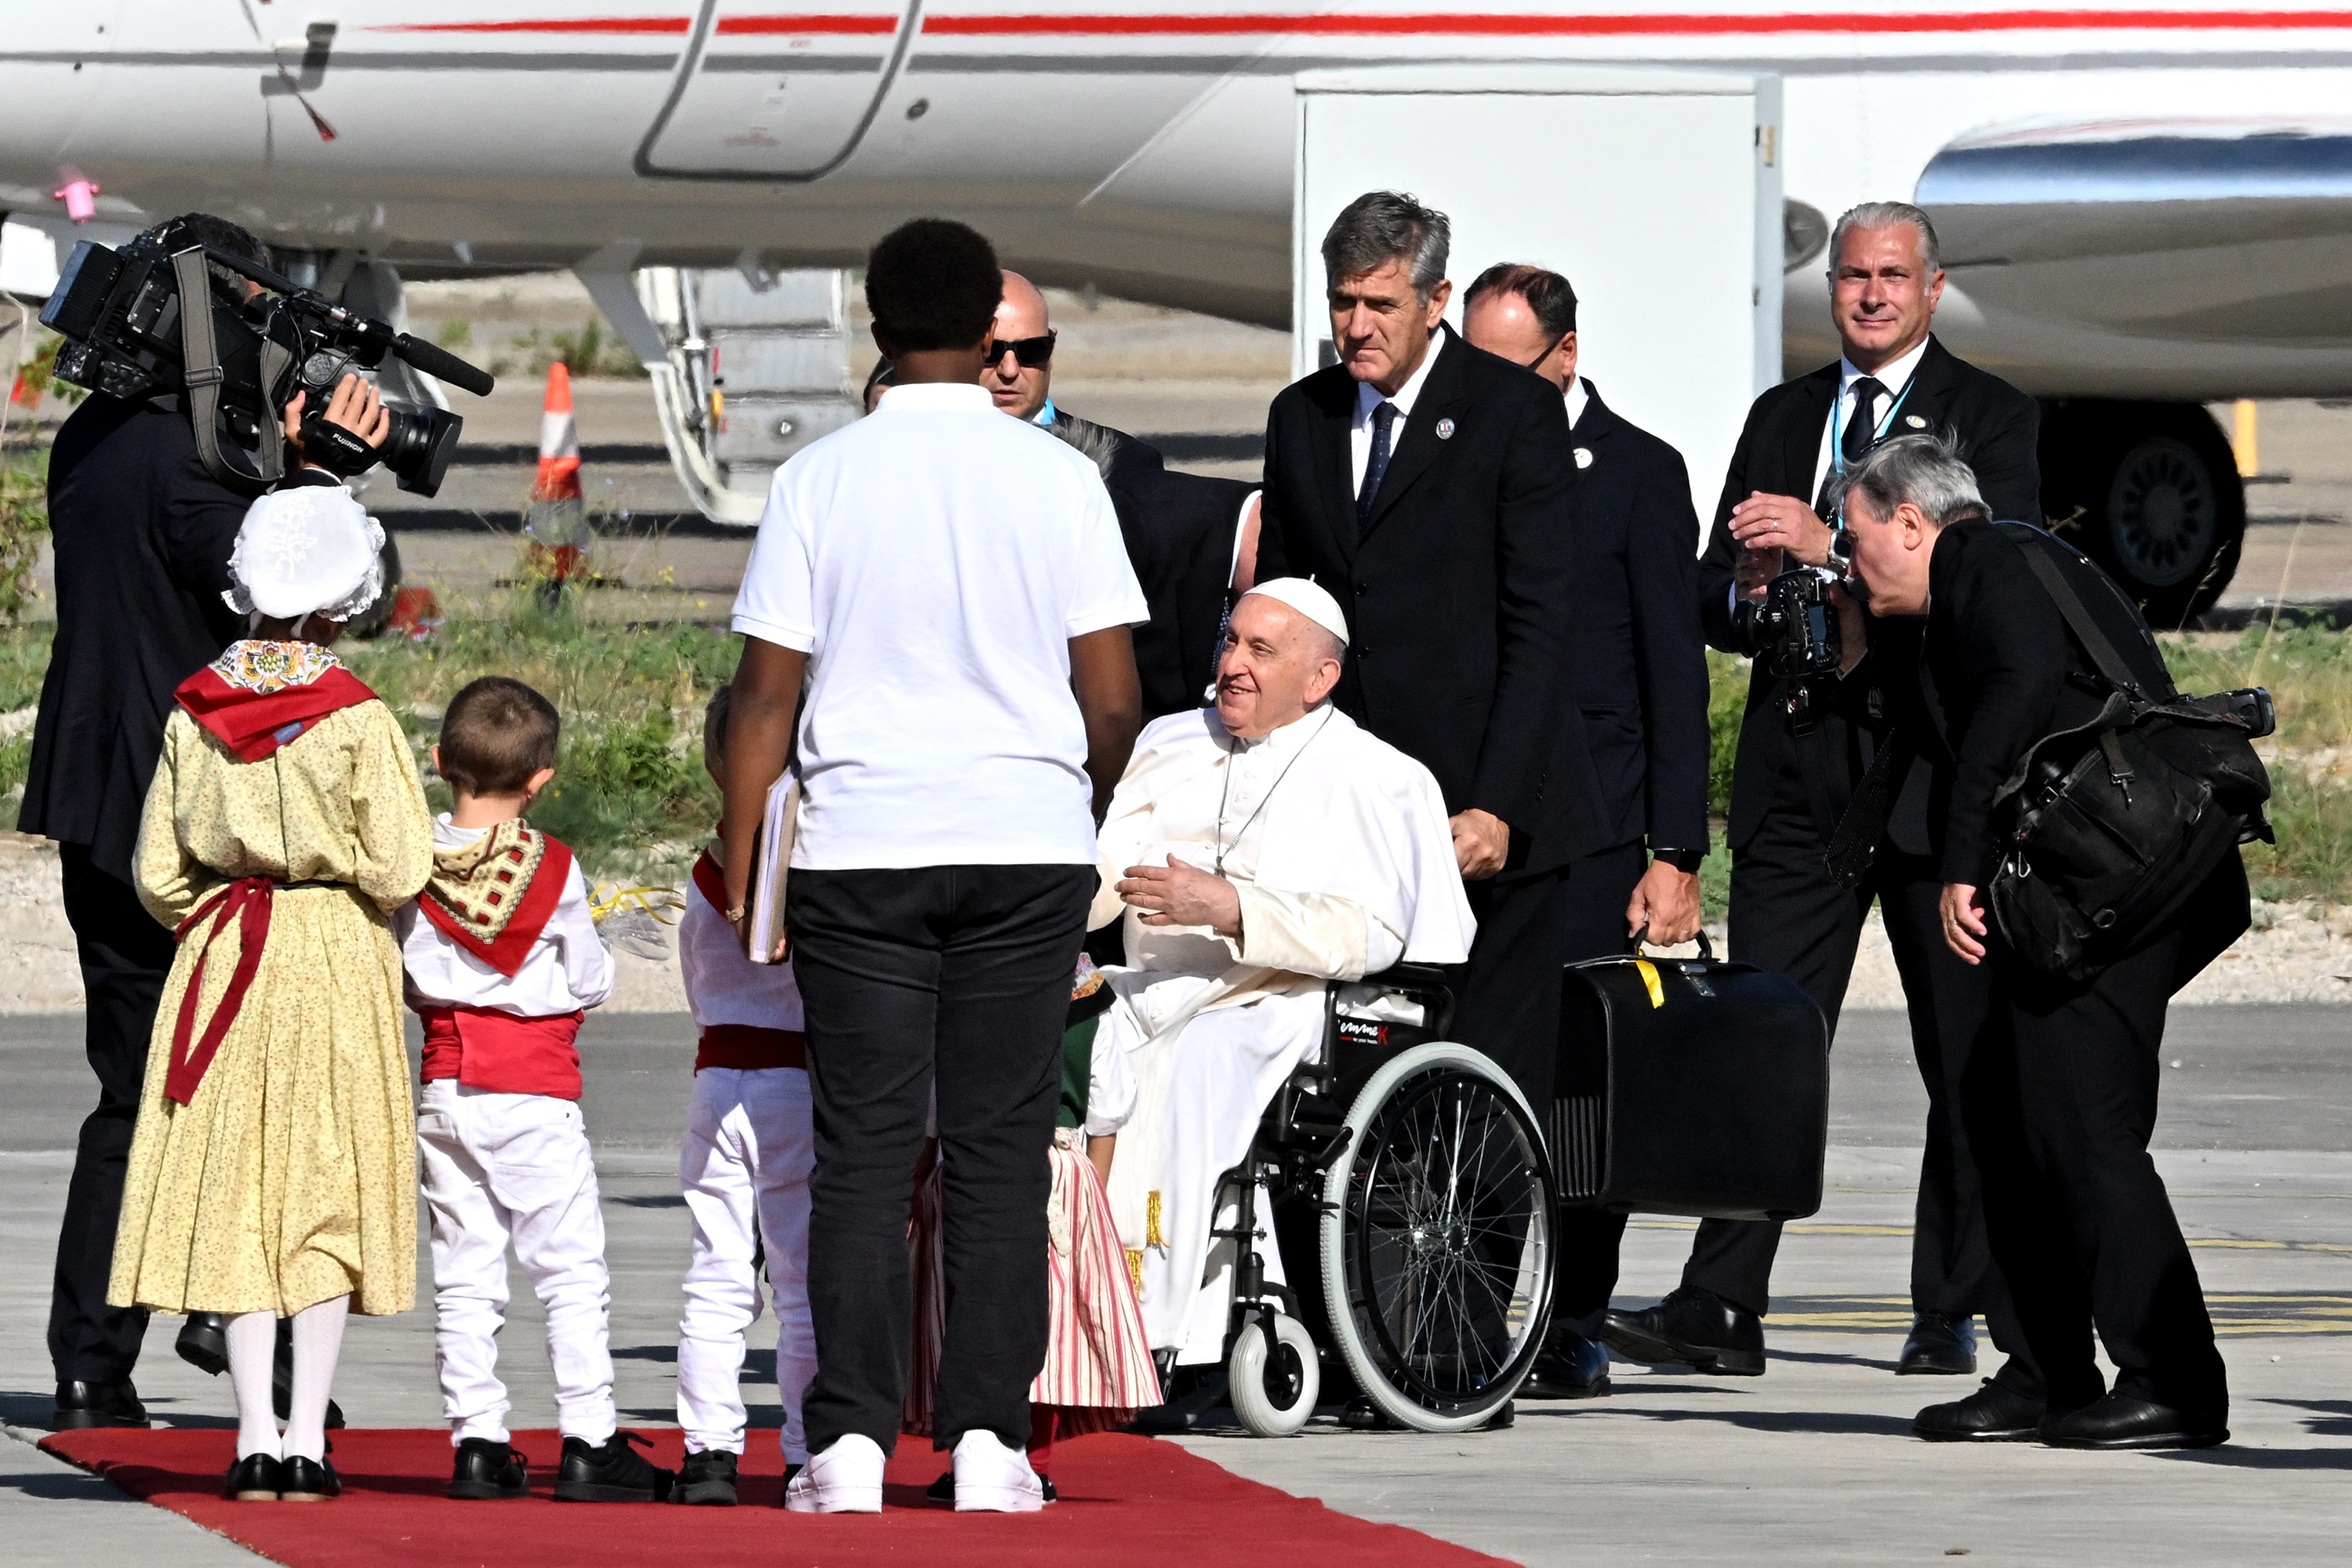 Pope Francis attends the official welcome ceremony upon his arrival at Marseille